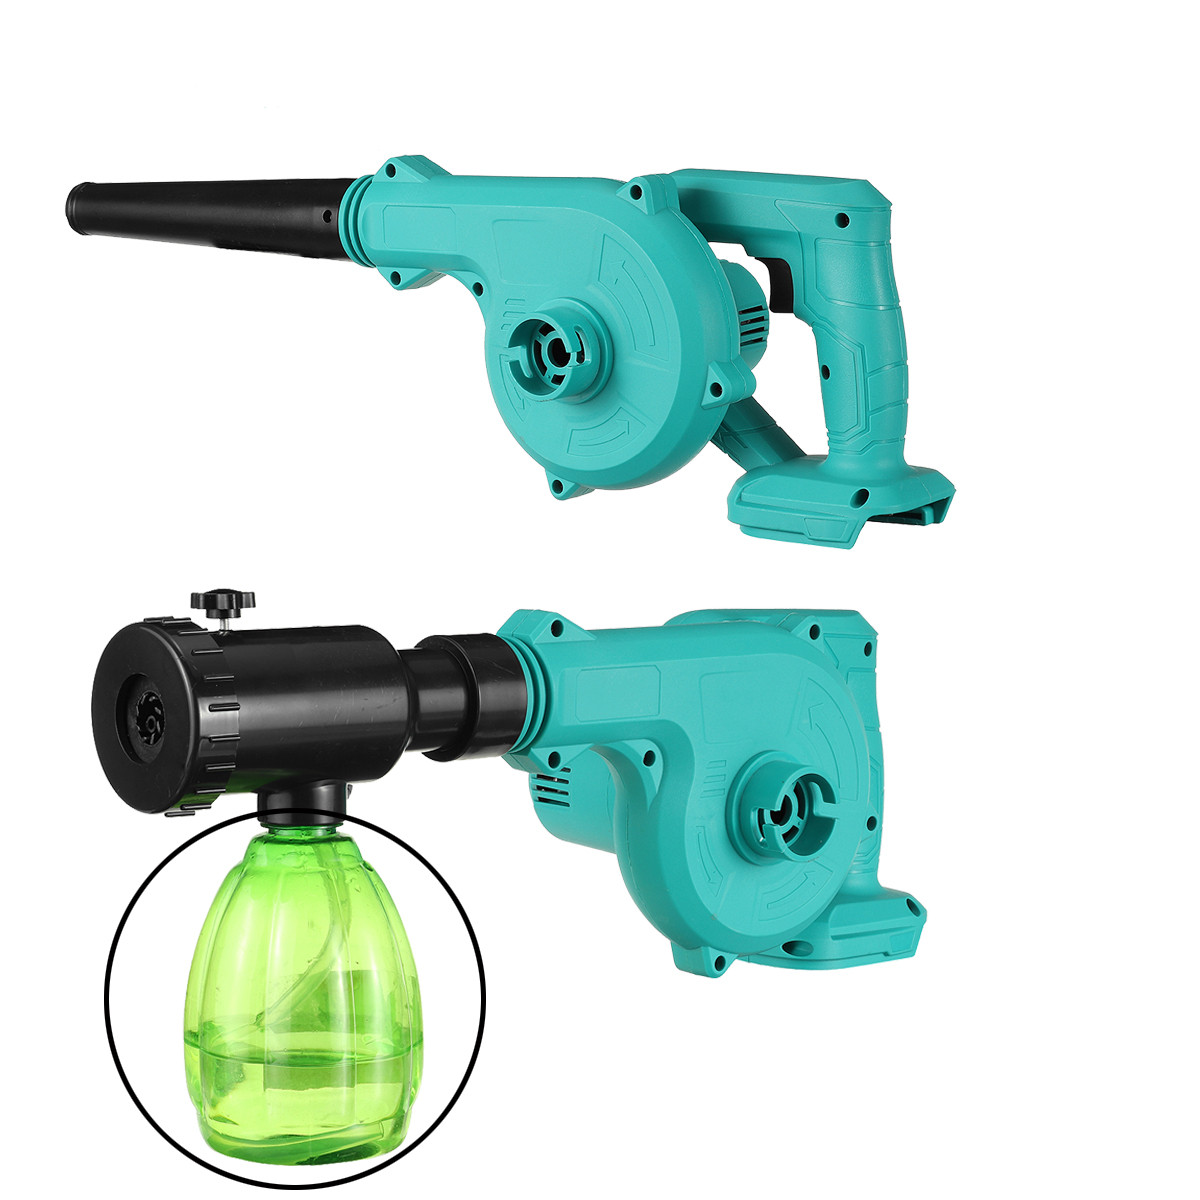 Find 1800W Portable Cordless Car Washer High Pressure Car Household Washer Cleaner Guns Pumps Tools Fit Makita for Sale on Gipsybee.com with cryptocurrencies